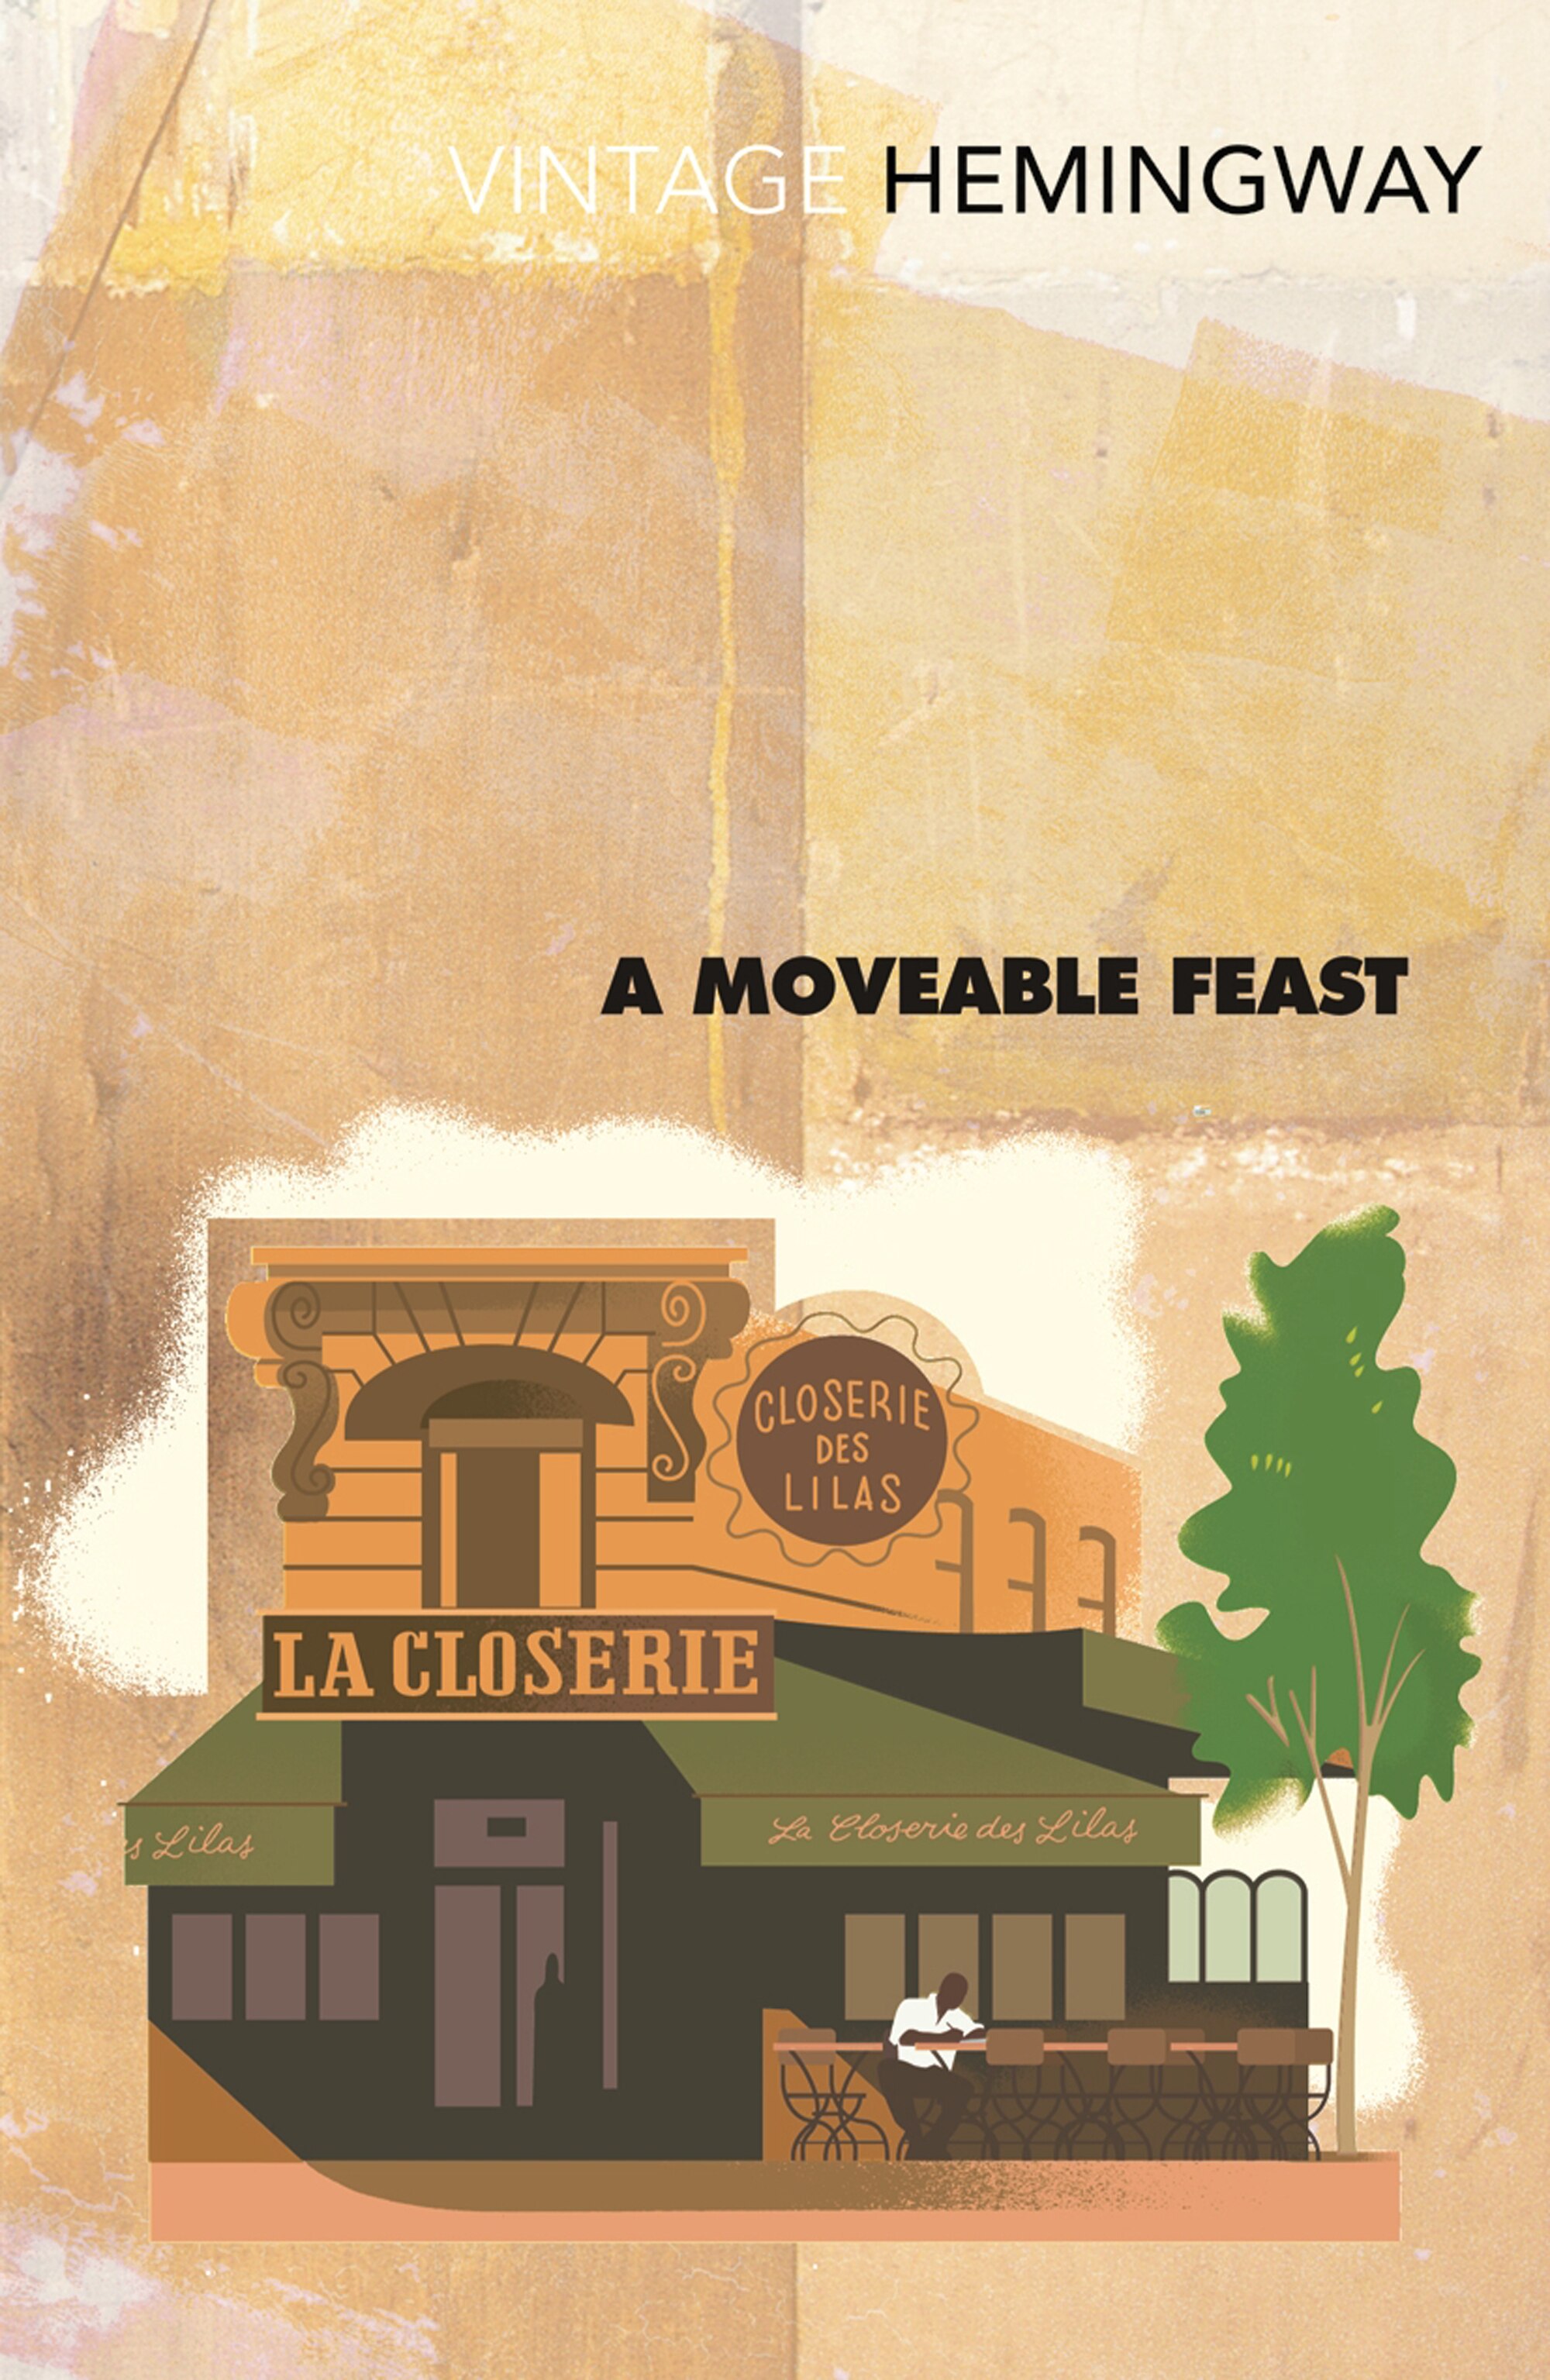 Cover of A Moveable Feast by Ernest Hemingway featuring the front of a Parisian store.